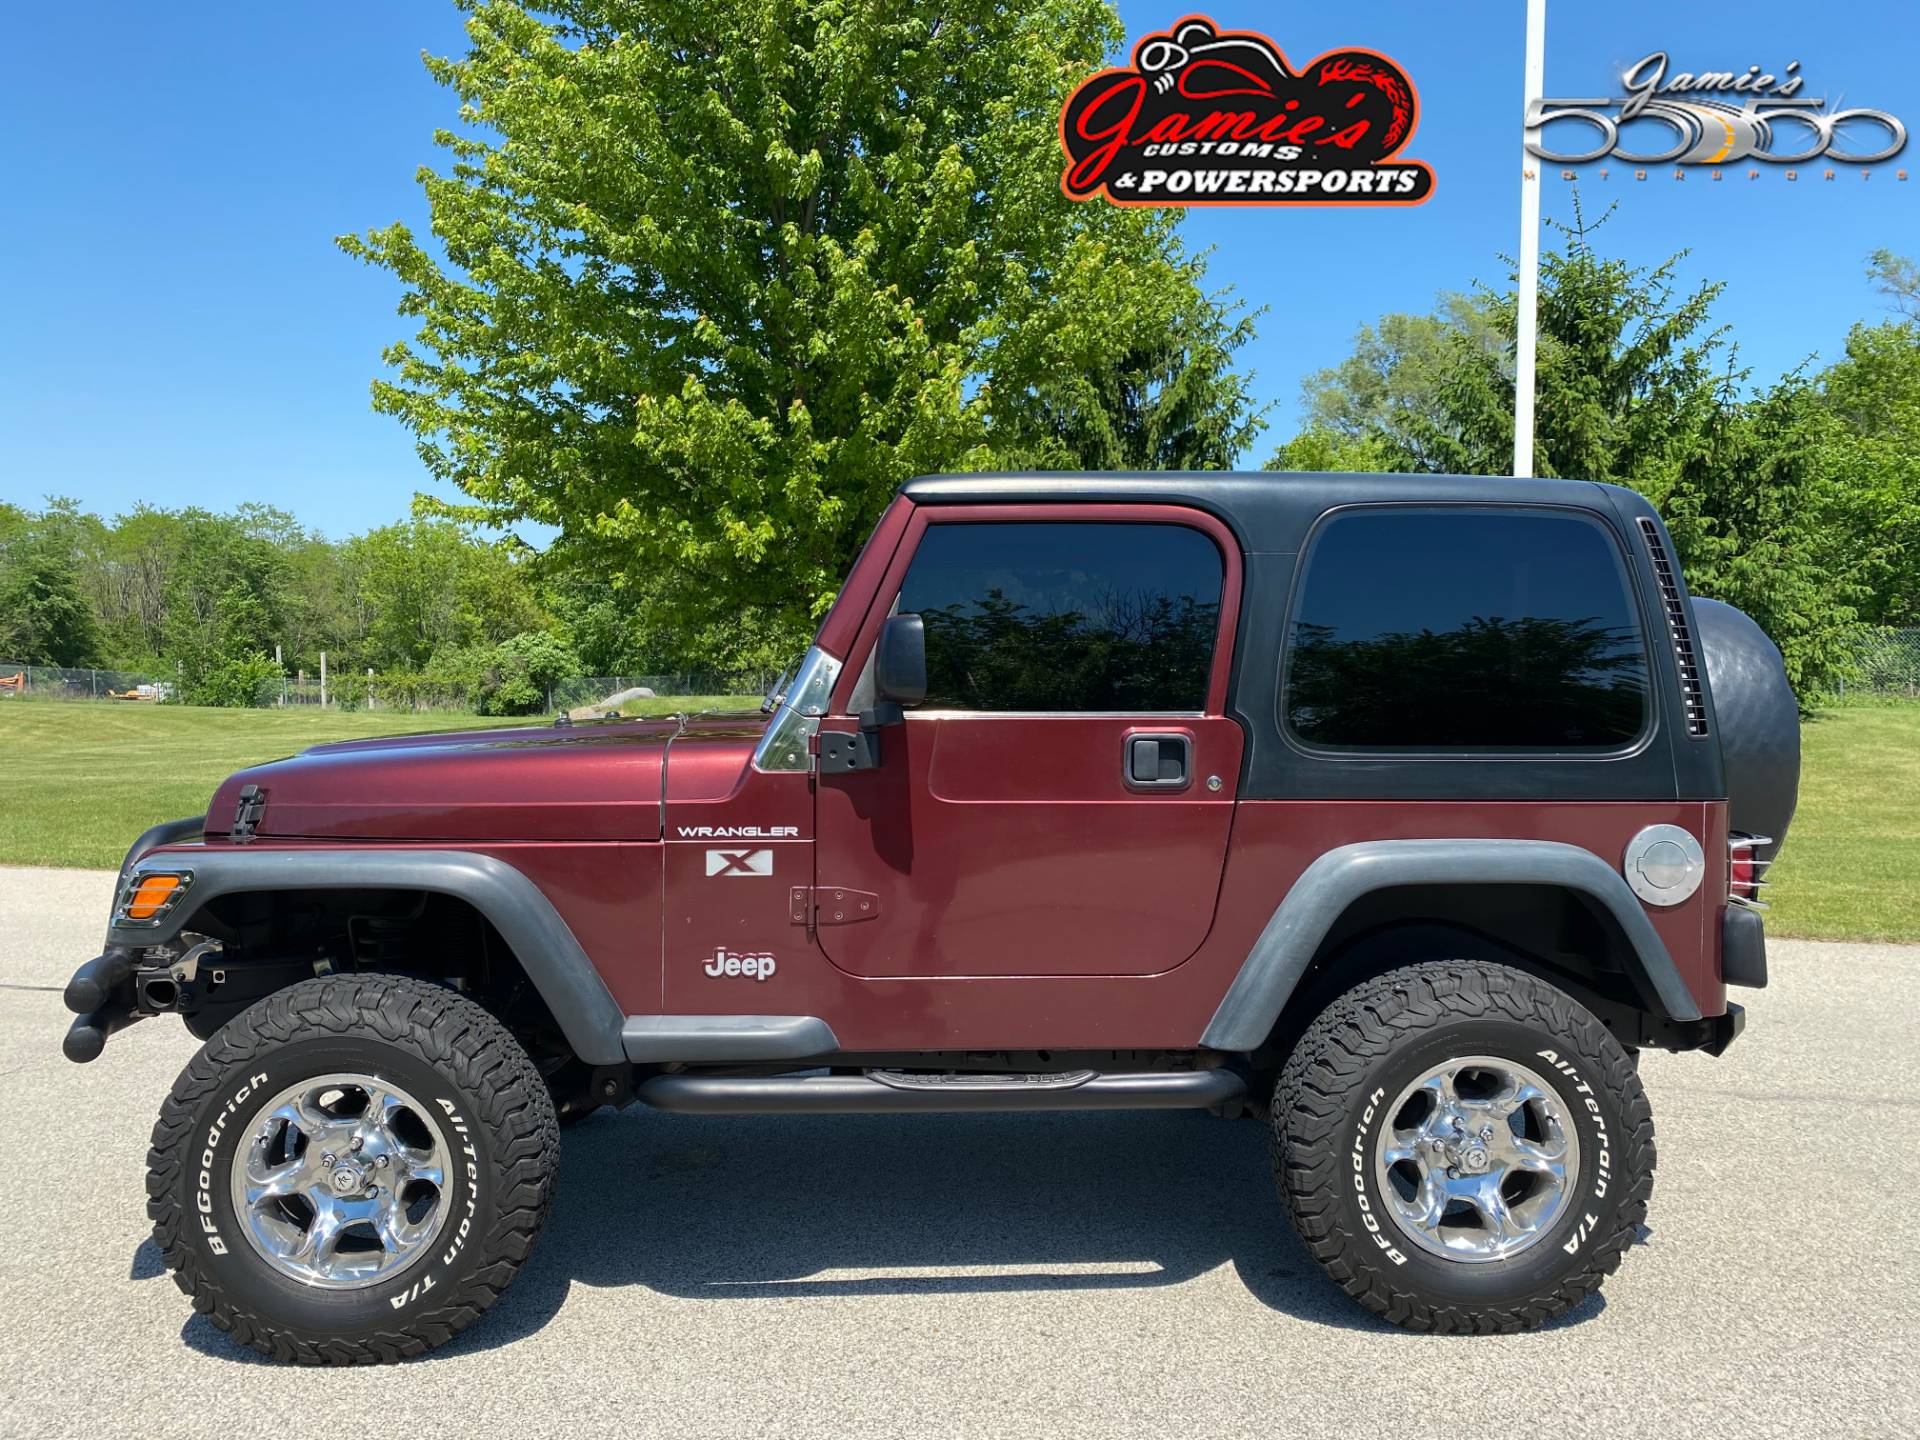 Used 2002 Jeep® Wrangler X | Automobile in Big Bend WI | 4183 Sienna Pearl  Coat